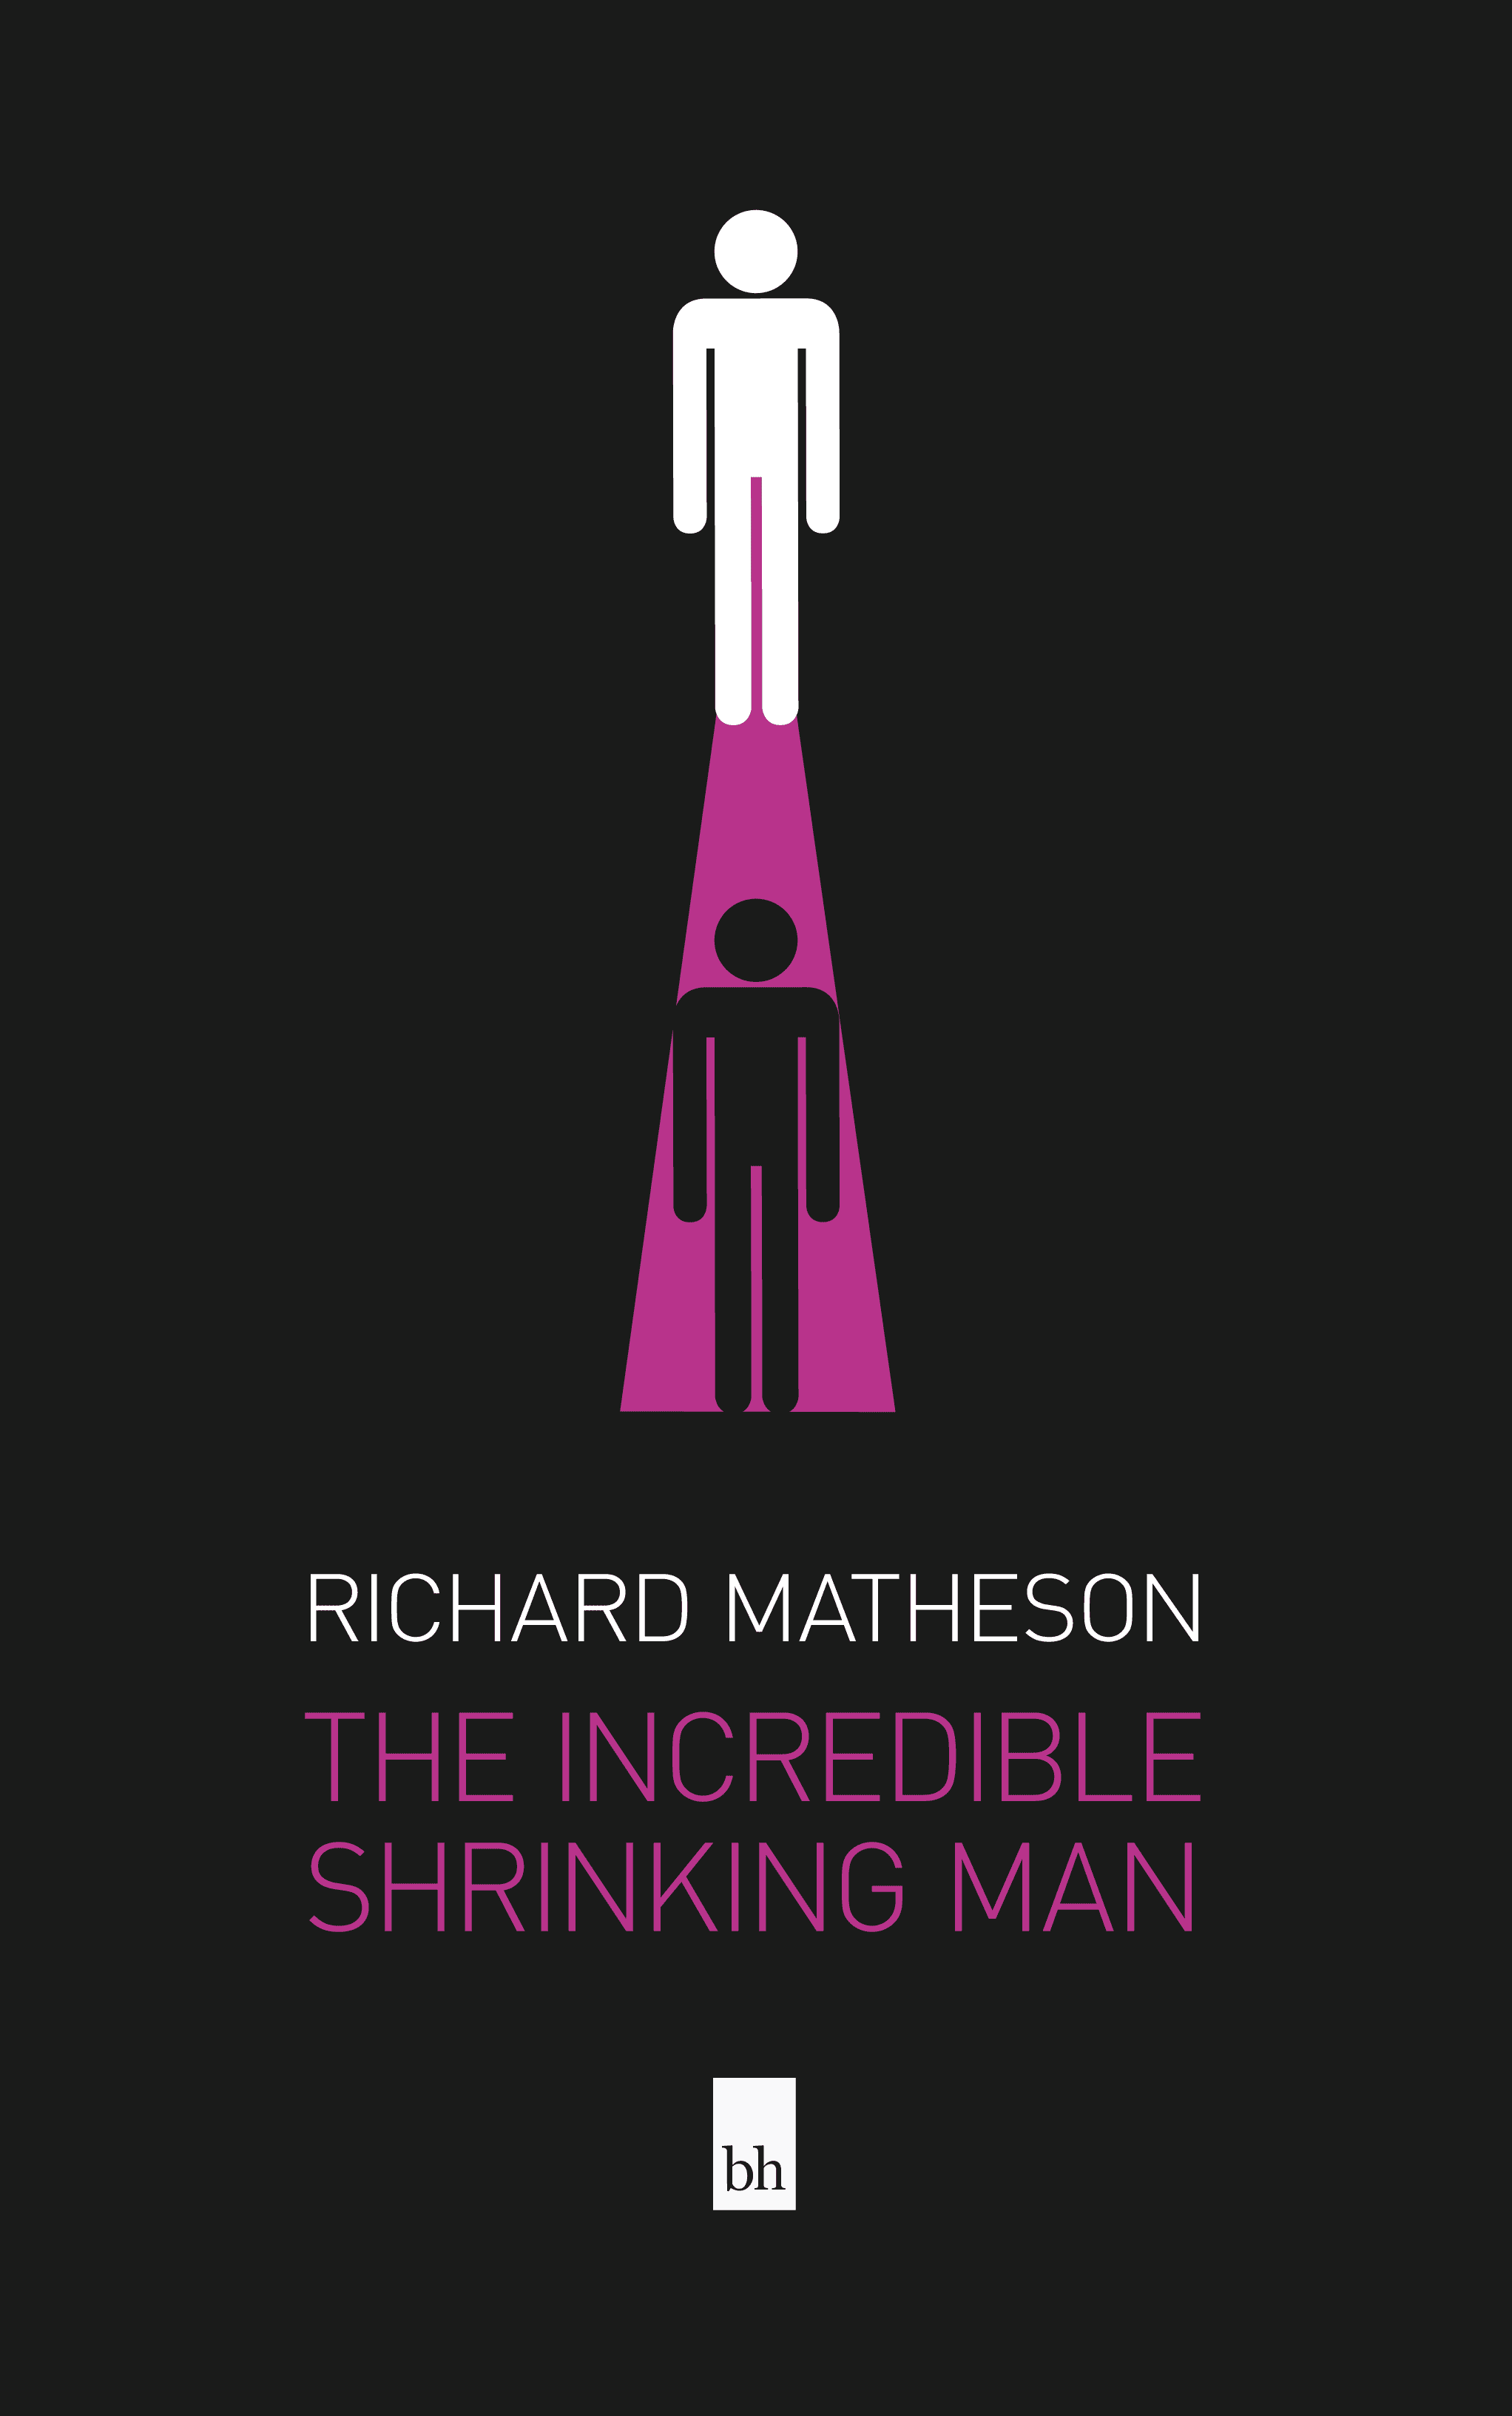 The Incredible Shrinking Man by Richard Matheson